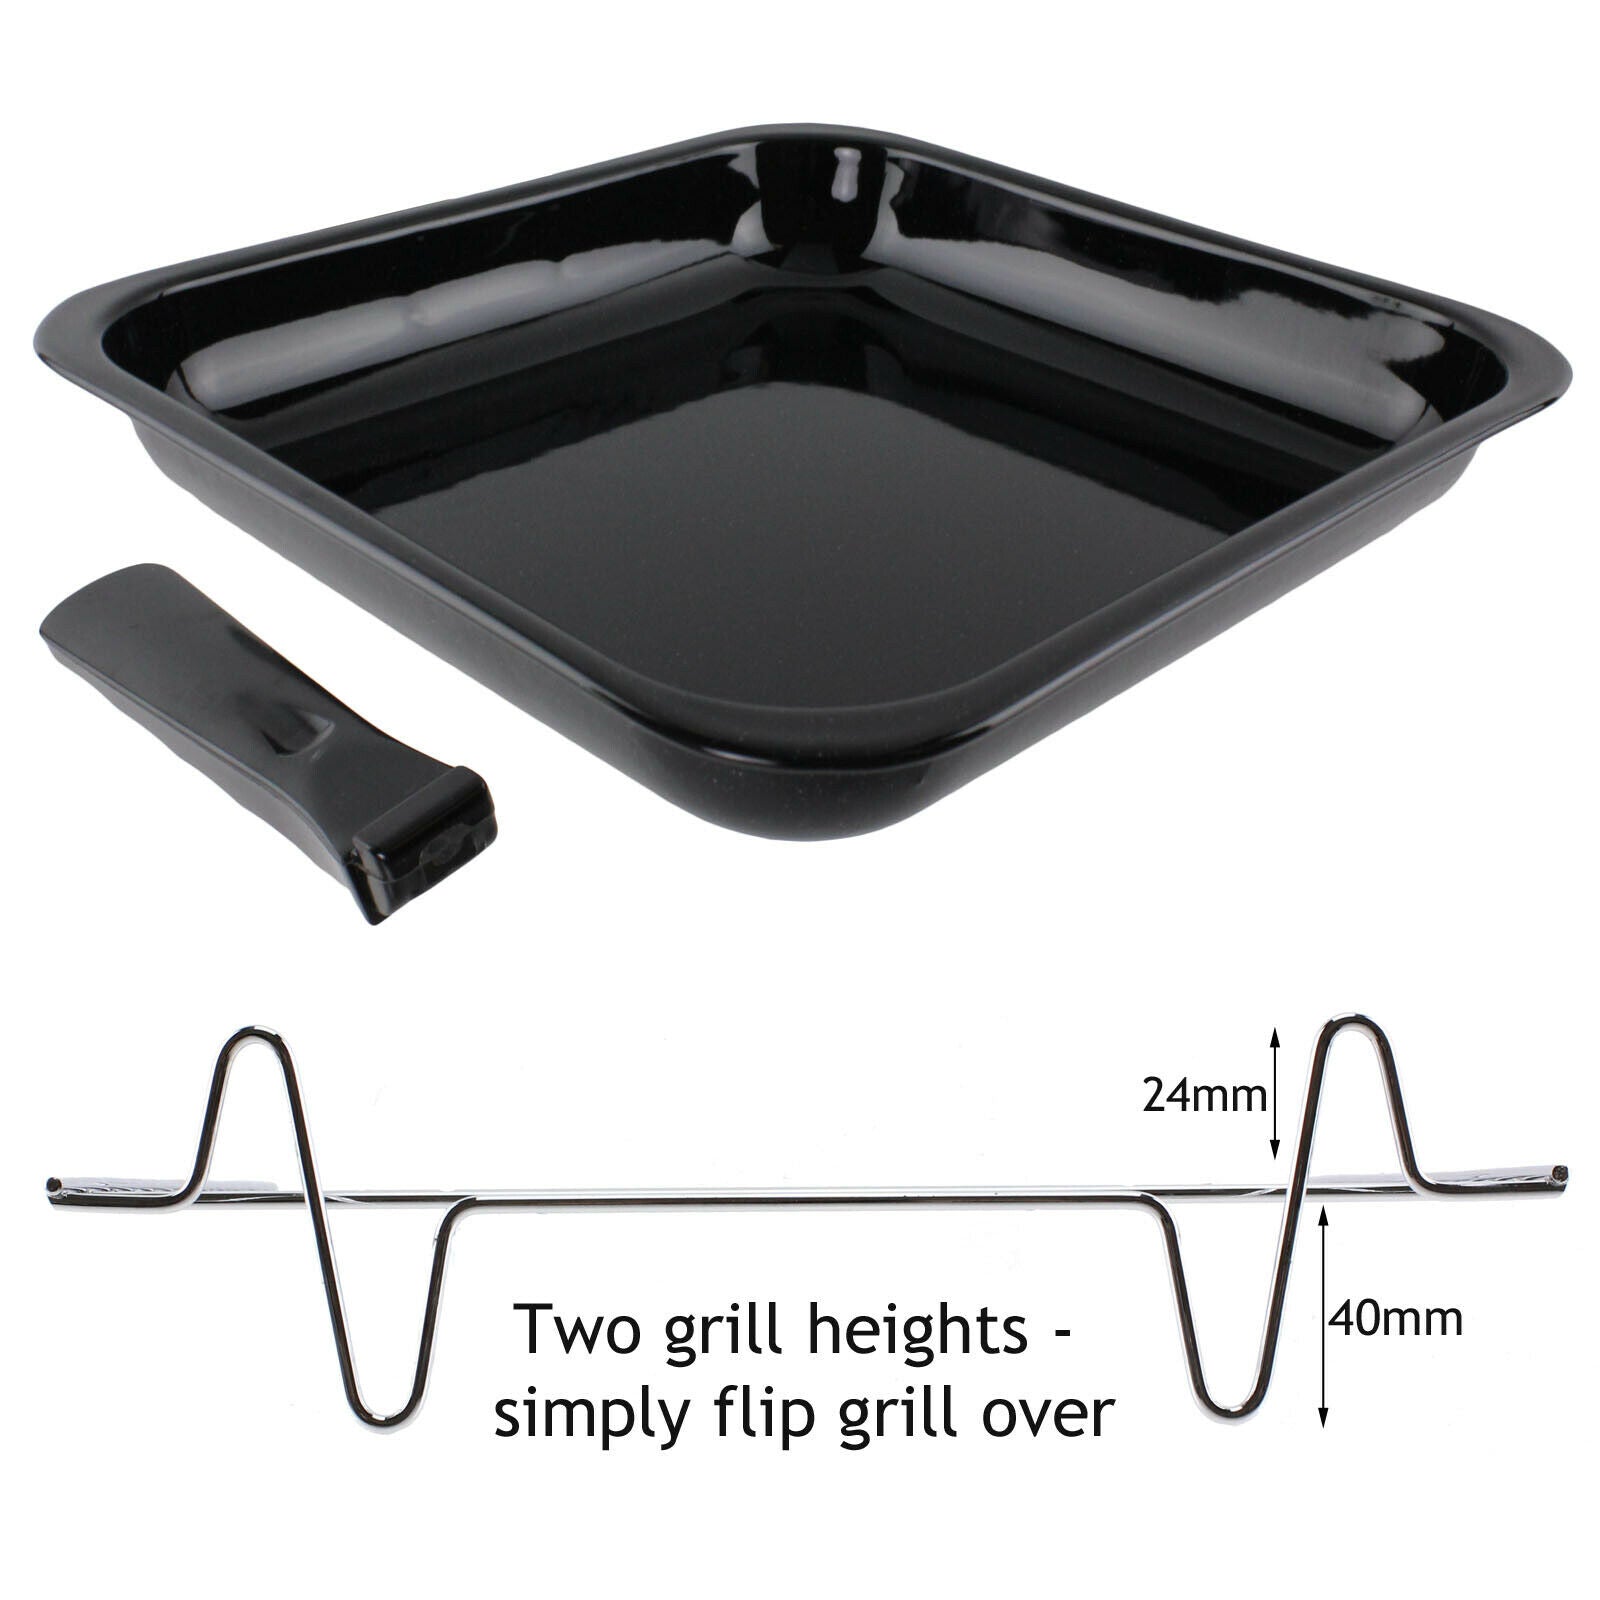 Two grill heights: 24 mm or 40 mm